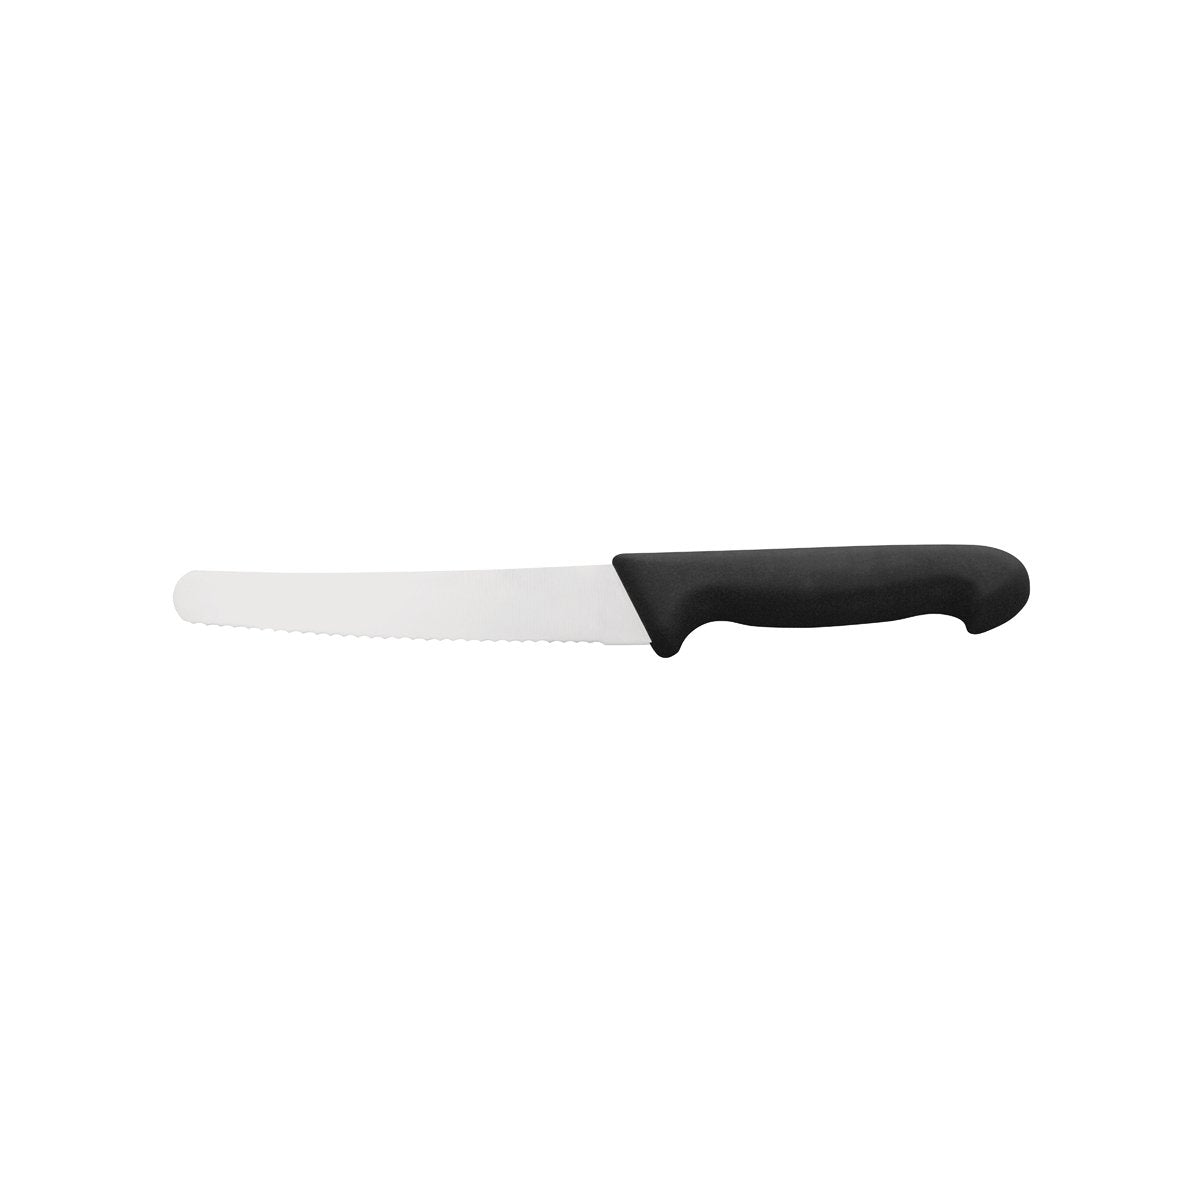 25025 Ivo Professional 55000 Bread Knife Rounded Tip 250mm Tomkin Australia Hospitality Supplies